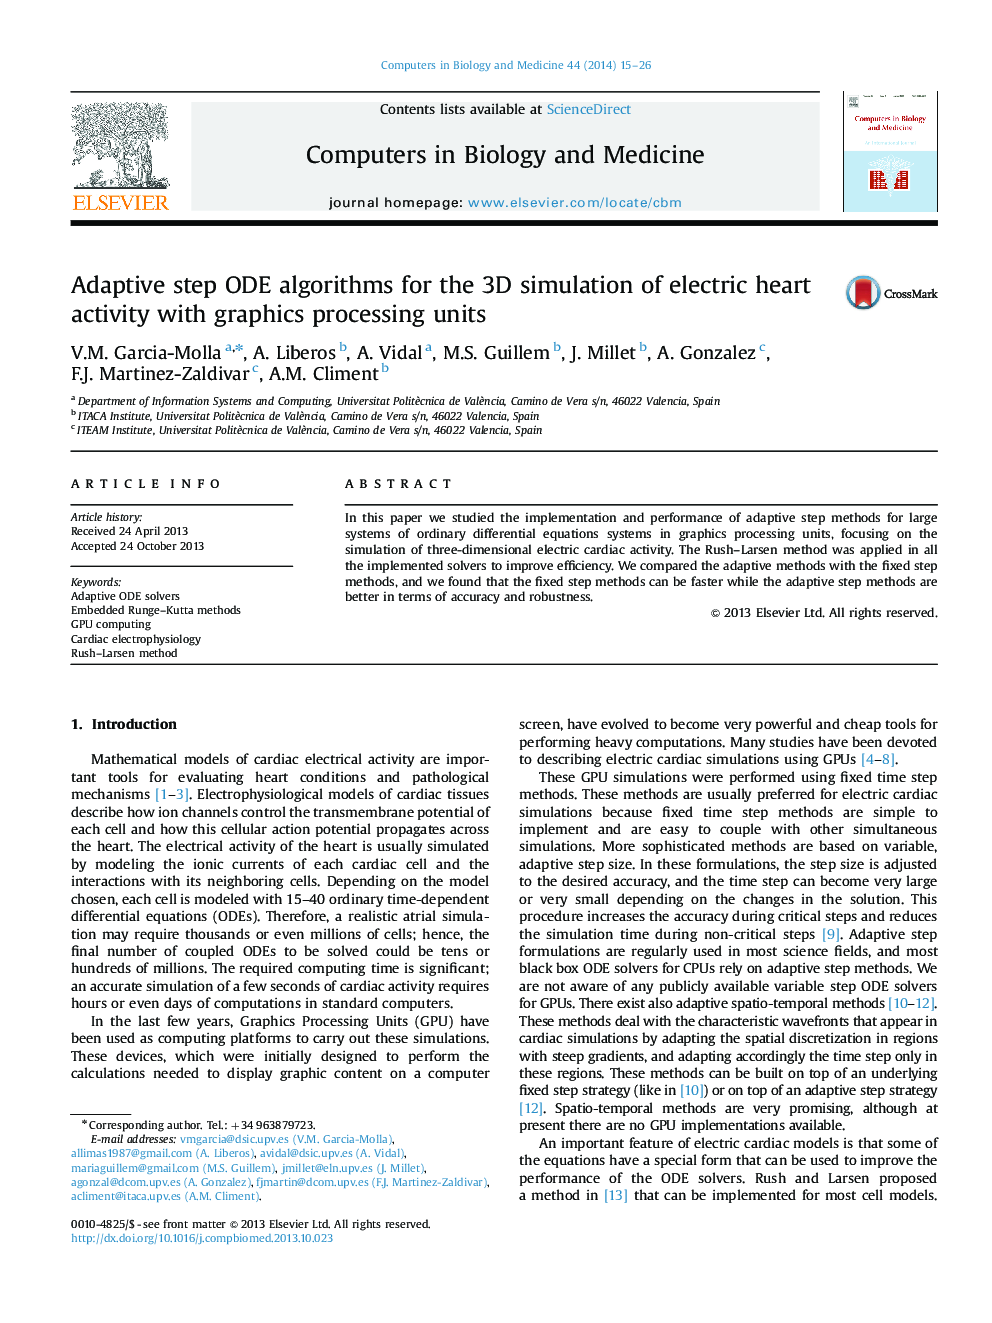 Adaptive step ODE algorithms for the 3D simulation of electric heart activity with graphics processing units